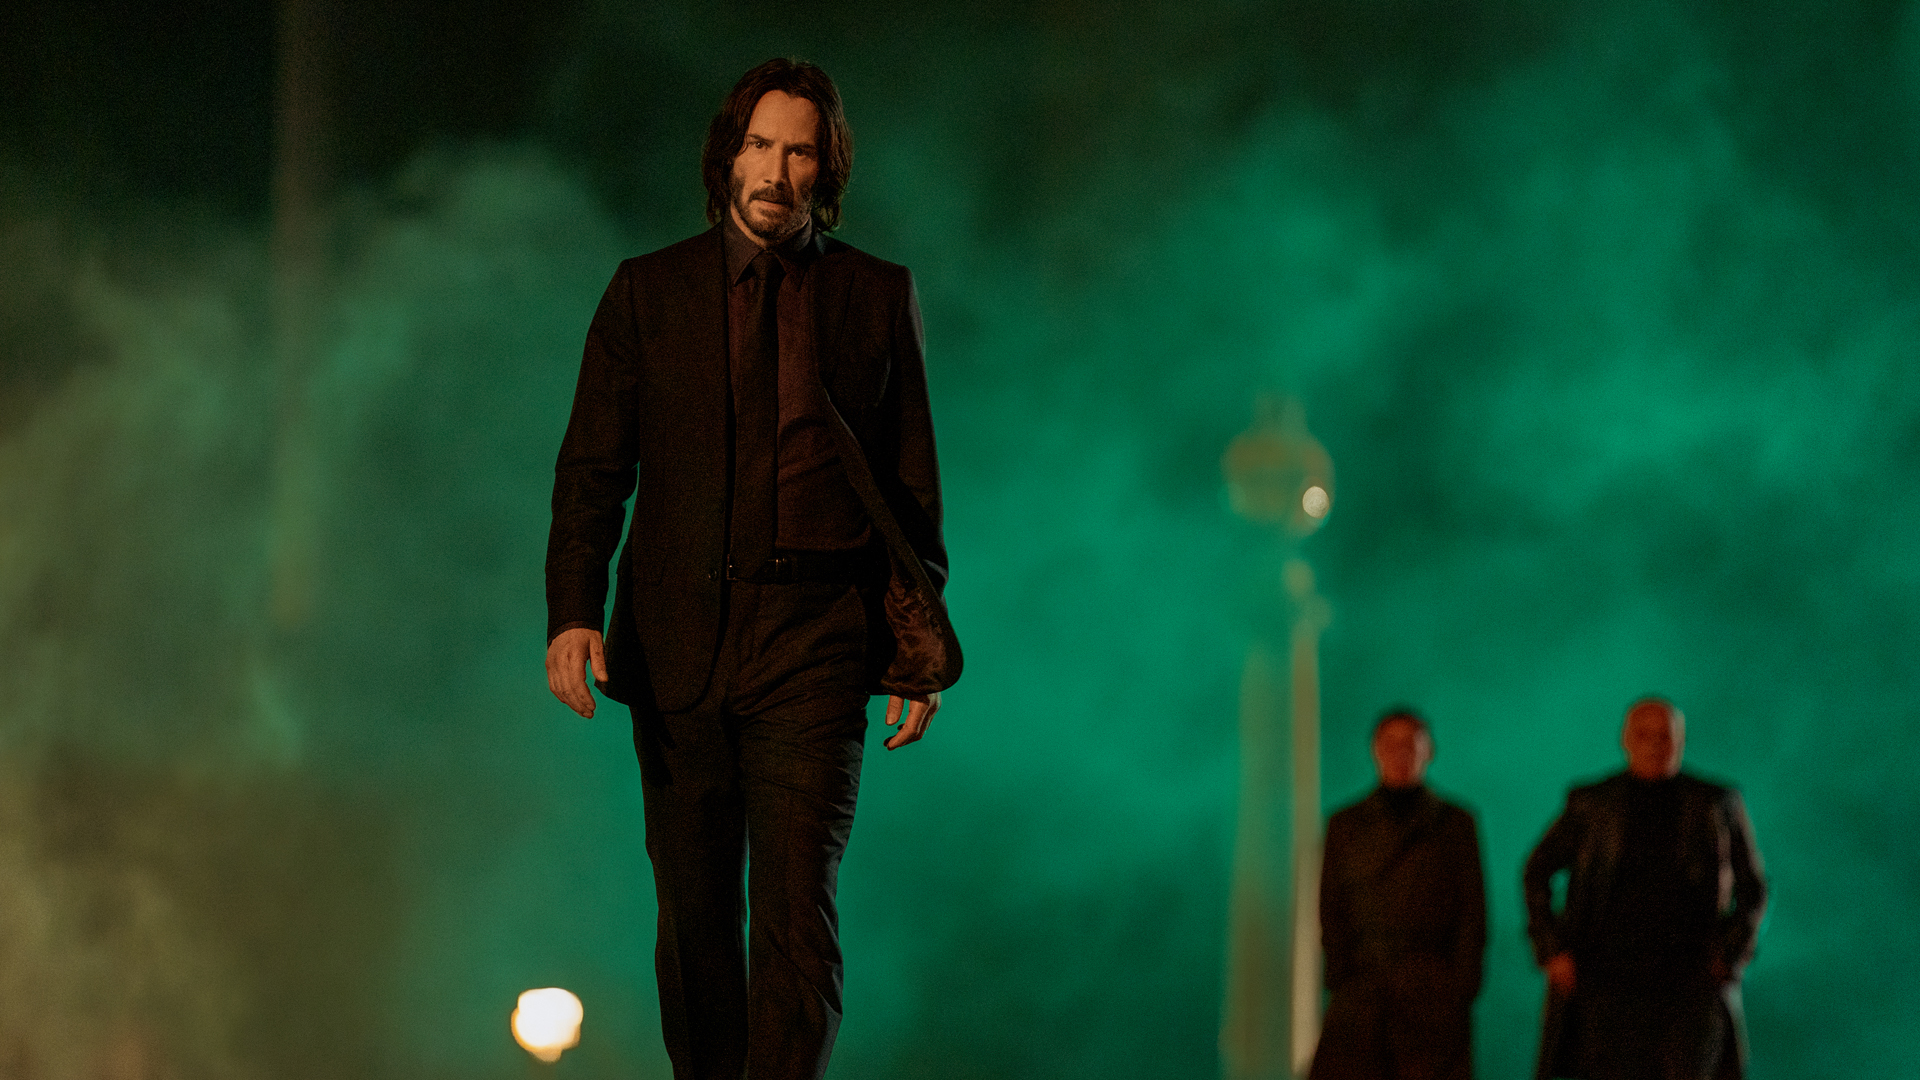 Here's How To Watch 'John Wick 4' Free Online: Is John Wick: Chapter 4  (2023) Streaming On HBO Max Or Netflix